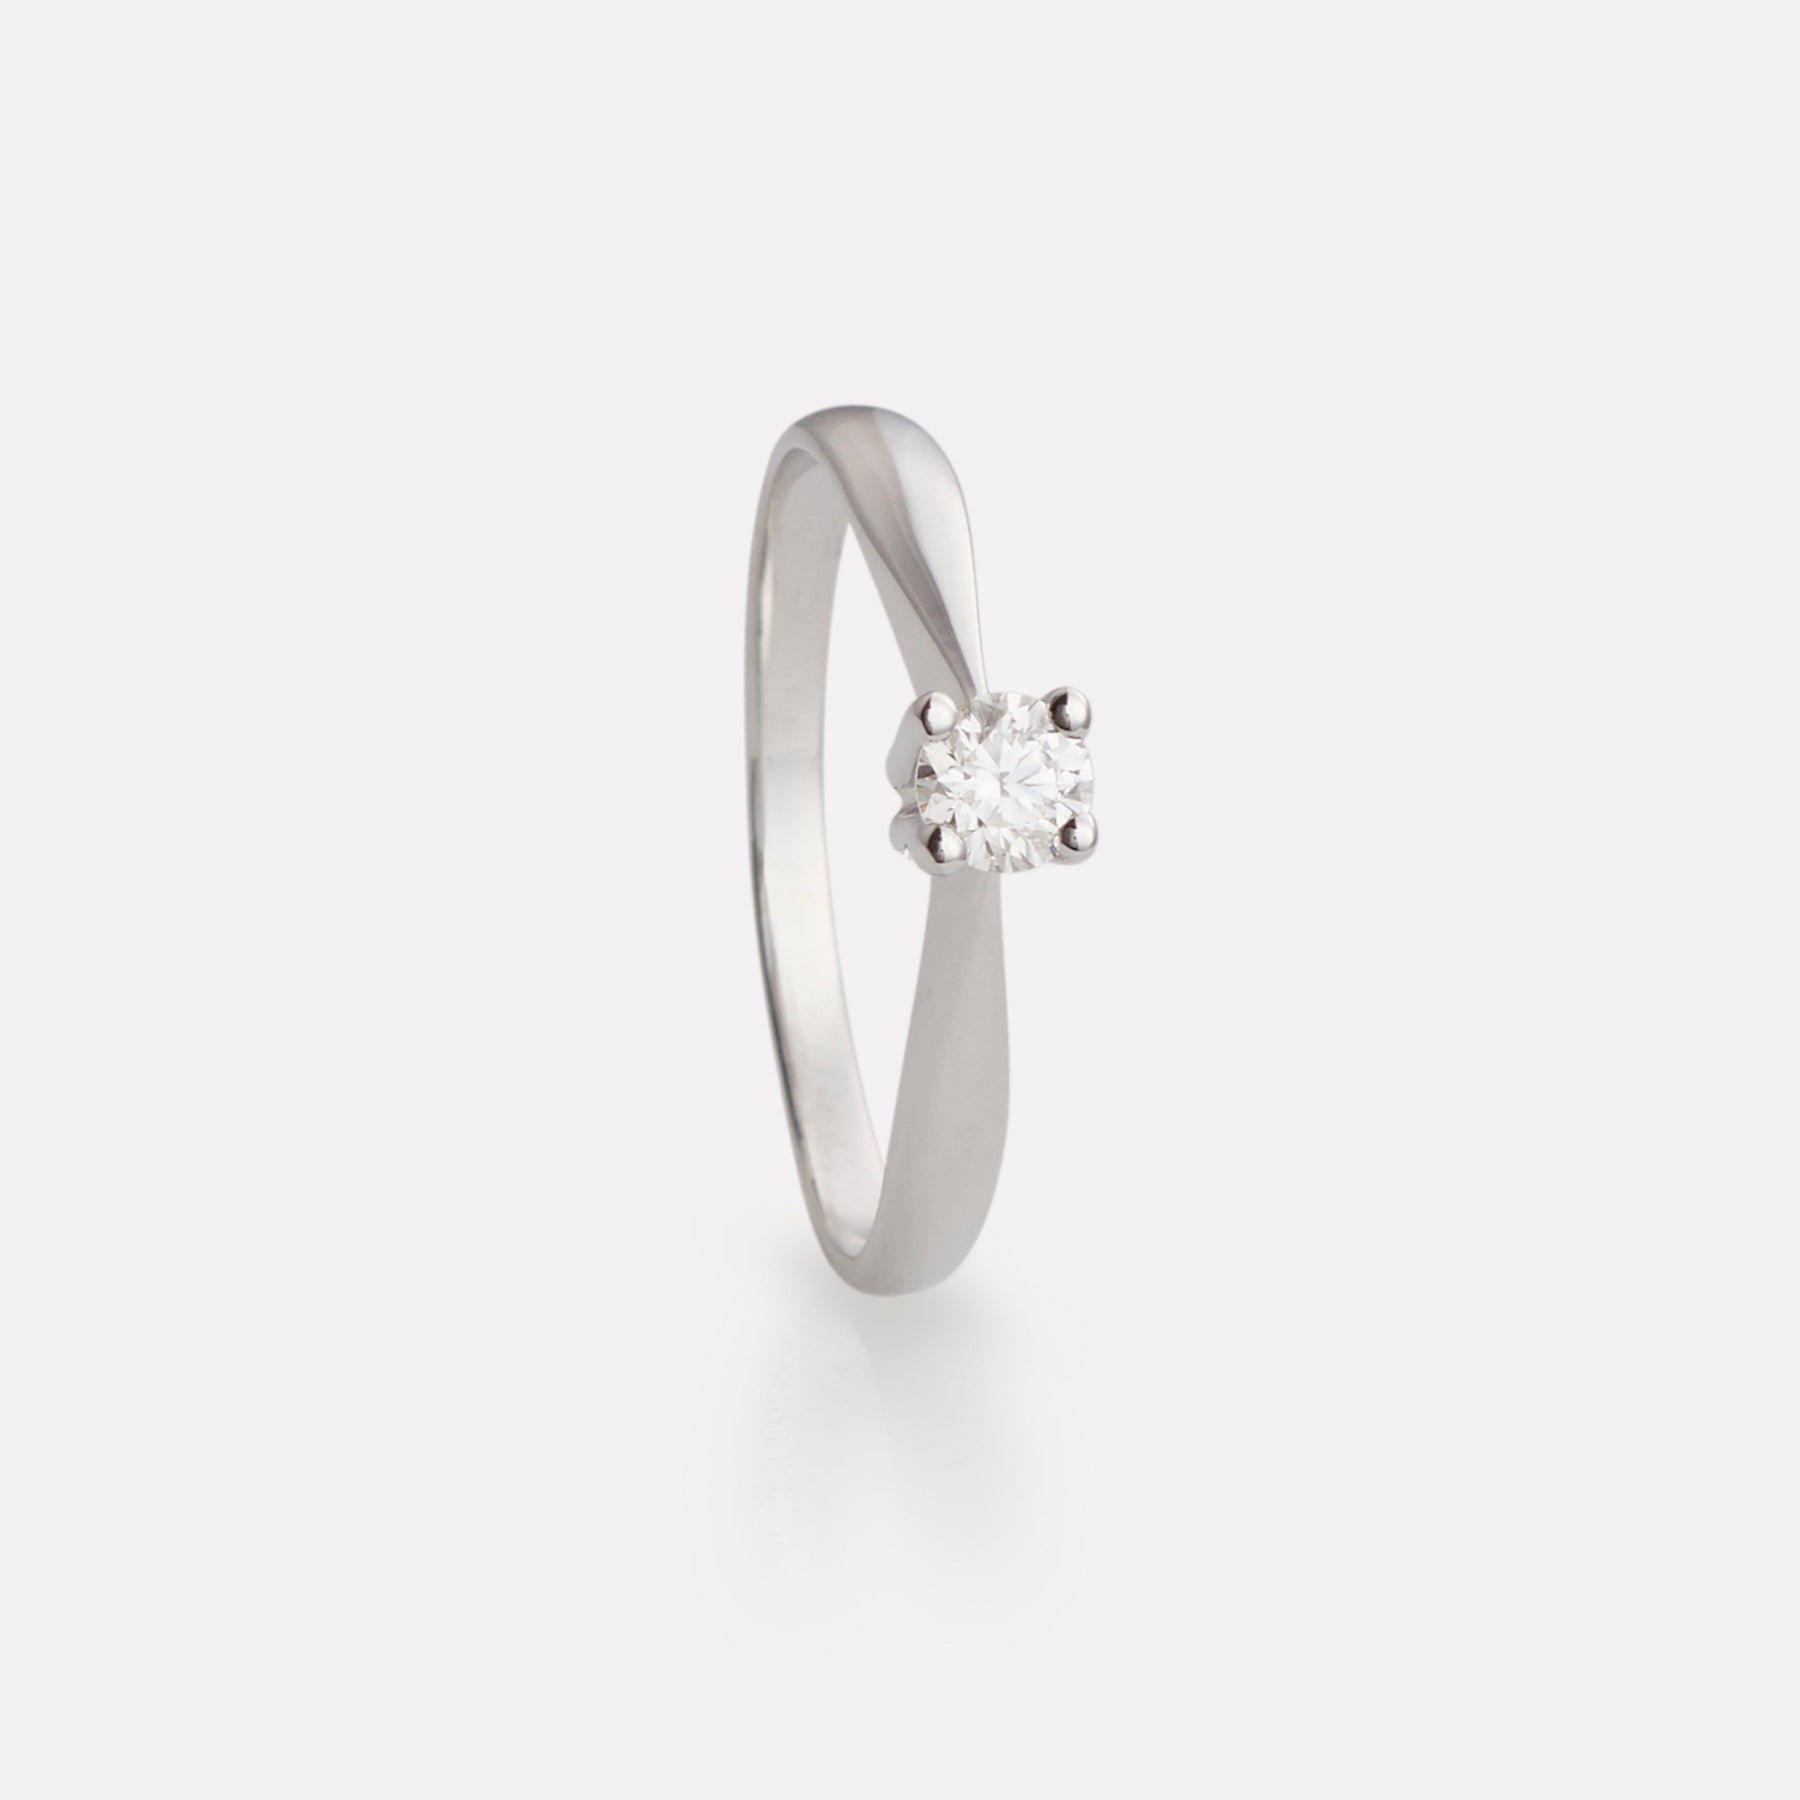 Karin ring in white gold with diamond